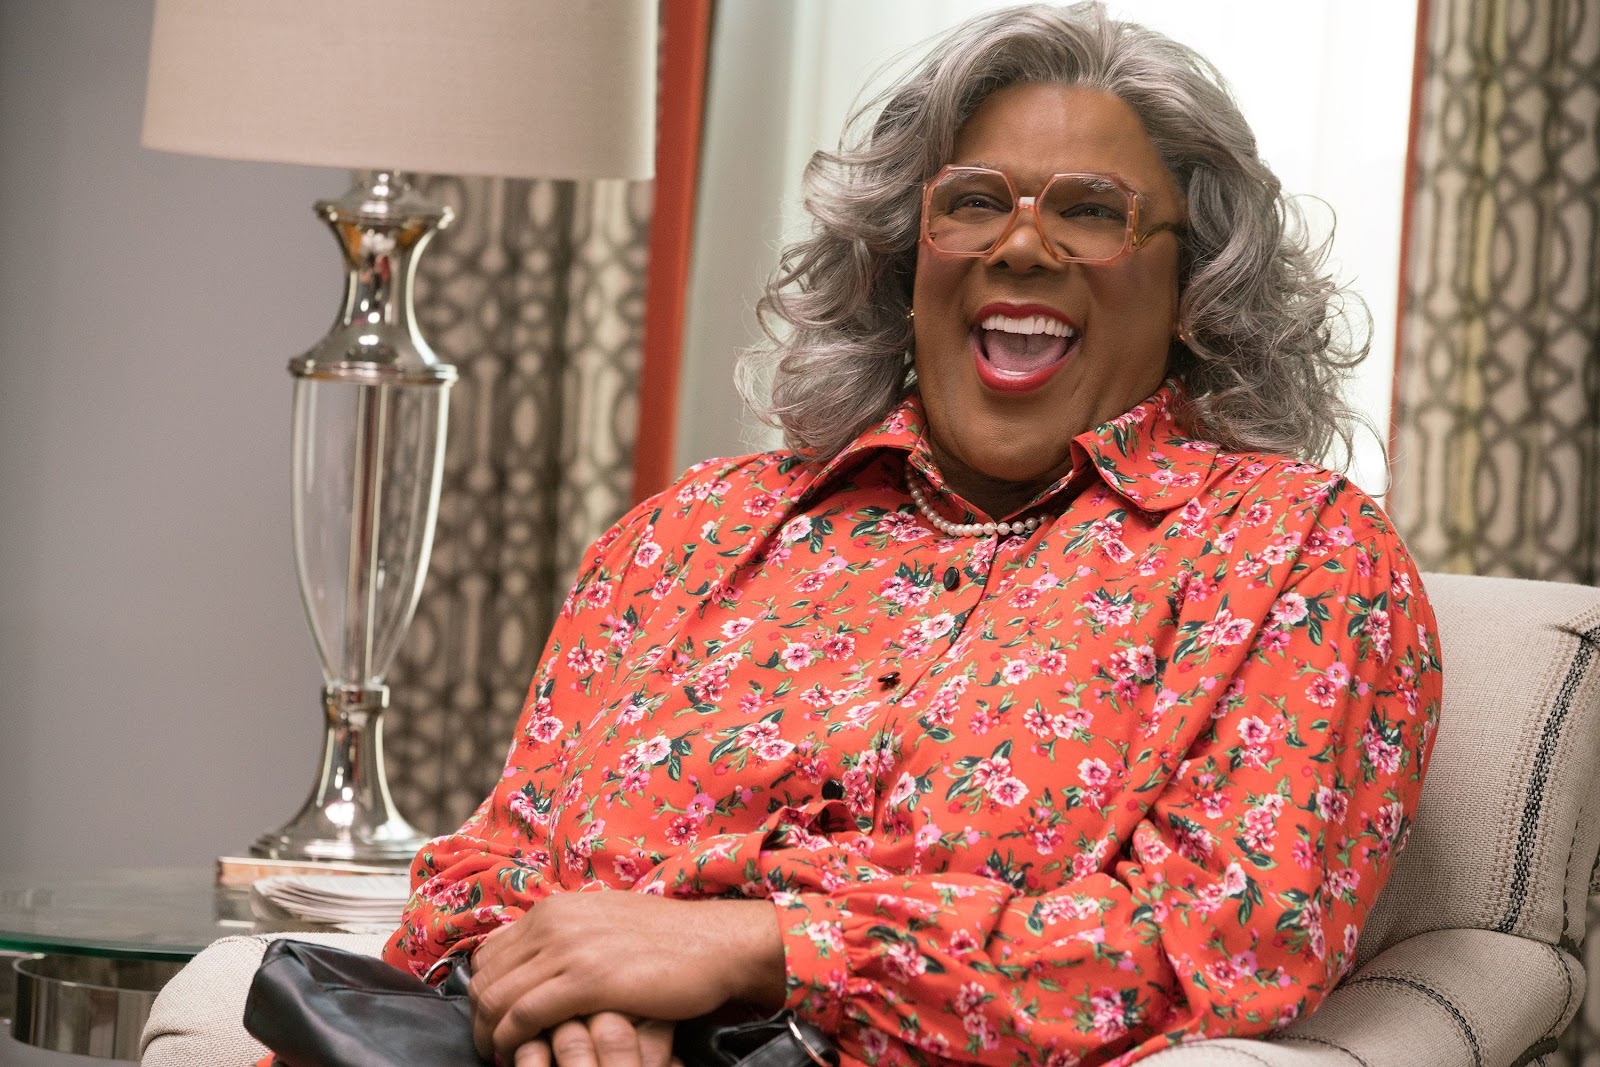 Tyler Perry reveals he's killing off his Madea character. Here's why.